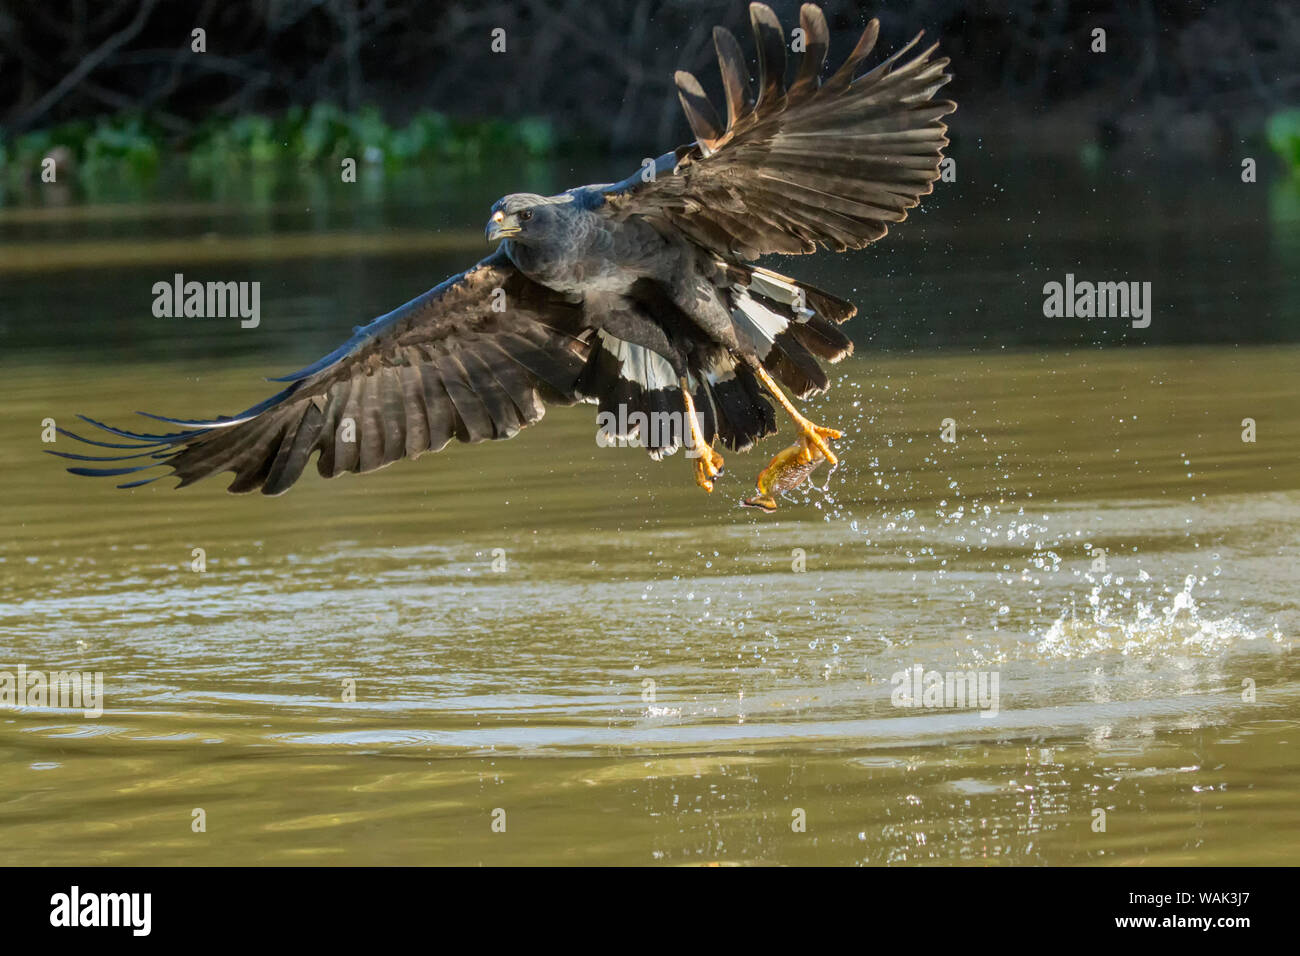 Pantanal, Mato Grosso, Brazil. Great black hawk swooping down to catch a fish in the Pixaim River Stock Photo